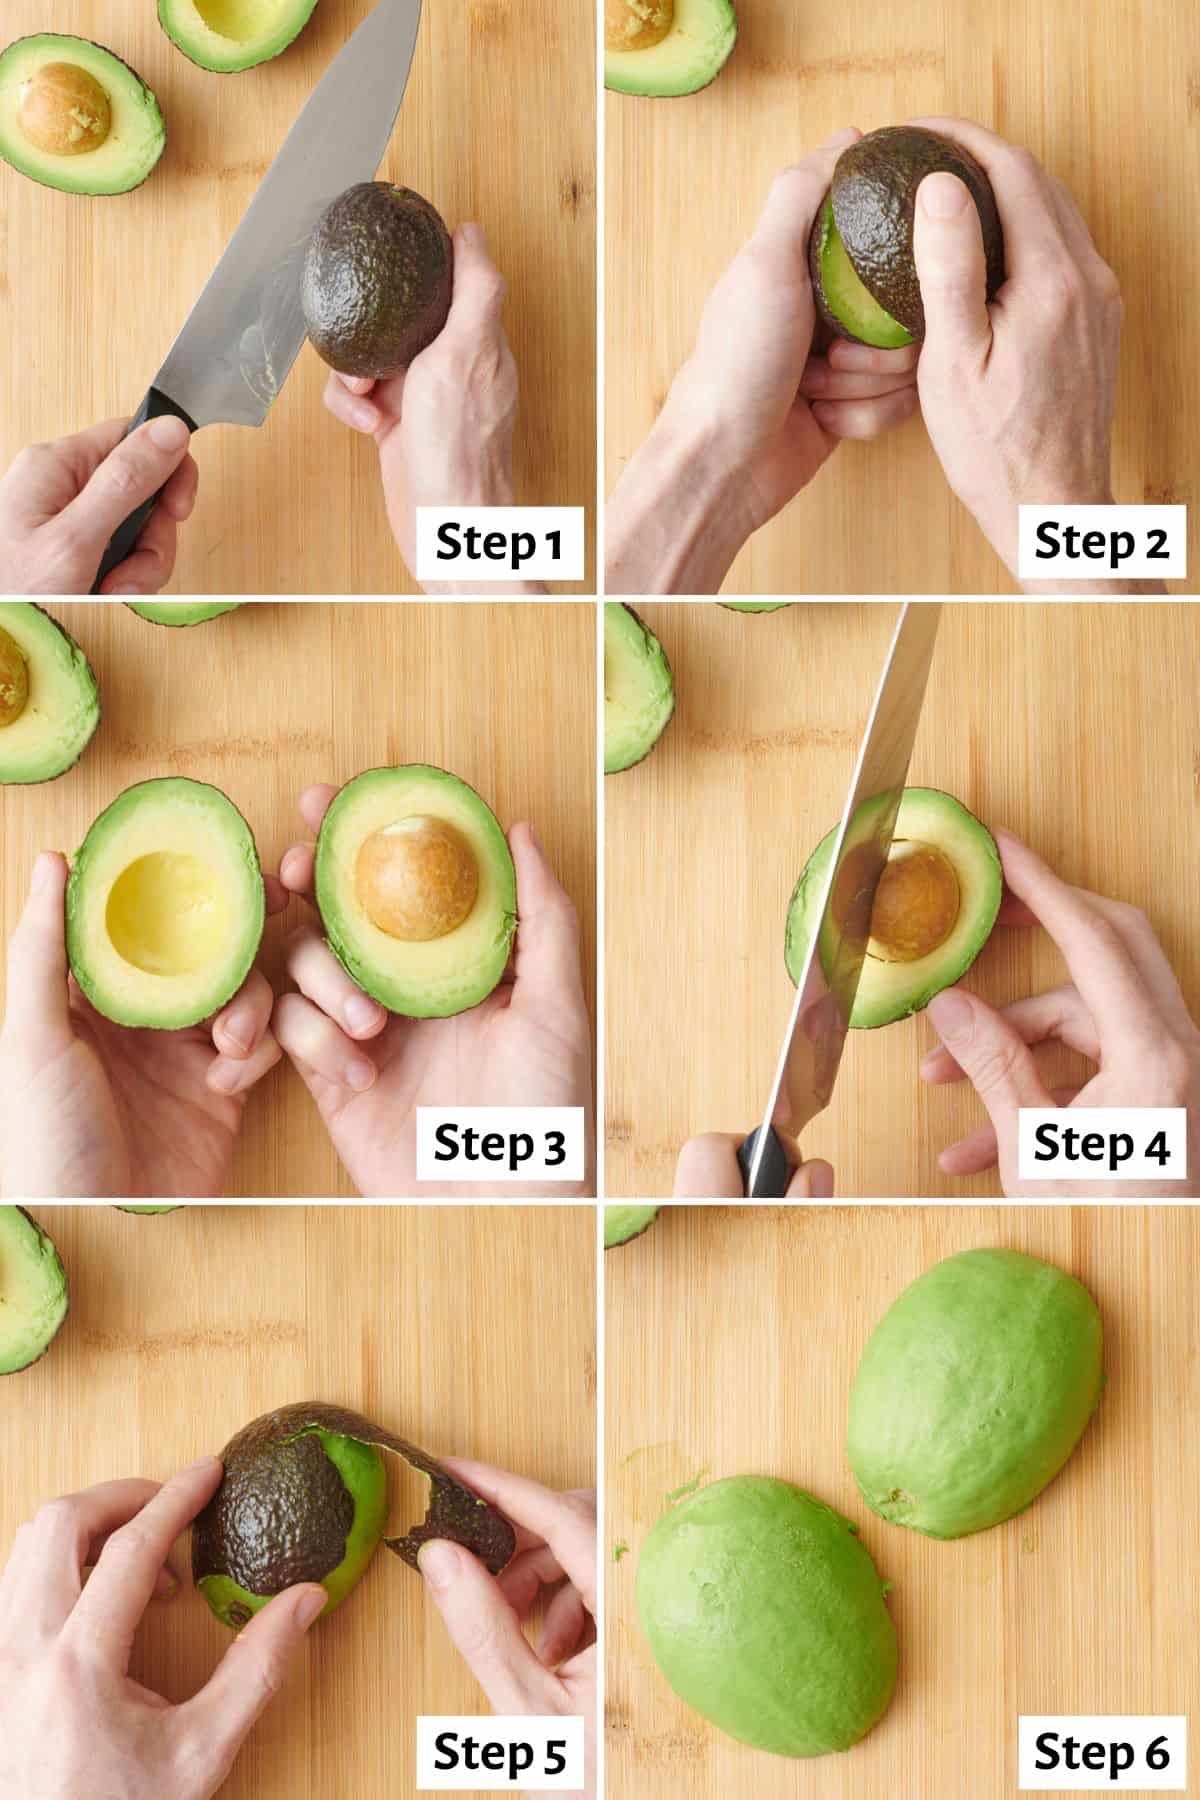 6 image collage preparing fruit for cutting: step 1- knife inserted into an avocado to the pit, step 2- hands twisting the two halves apart, step 3- avocado halves opened to show flesh and pit still attached, step 4- Pit side half on cutting board with hand holding it still and knife on pit, slightly twisted, step 5- Avocado half cut side down on cutting board with hand pulling skin away, step 6- two peel halves cut side down on cutting board.